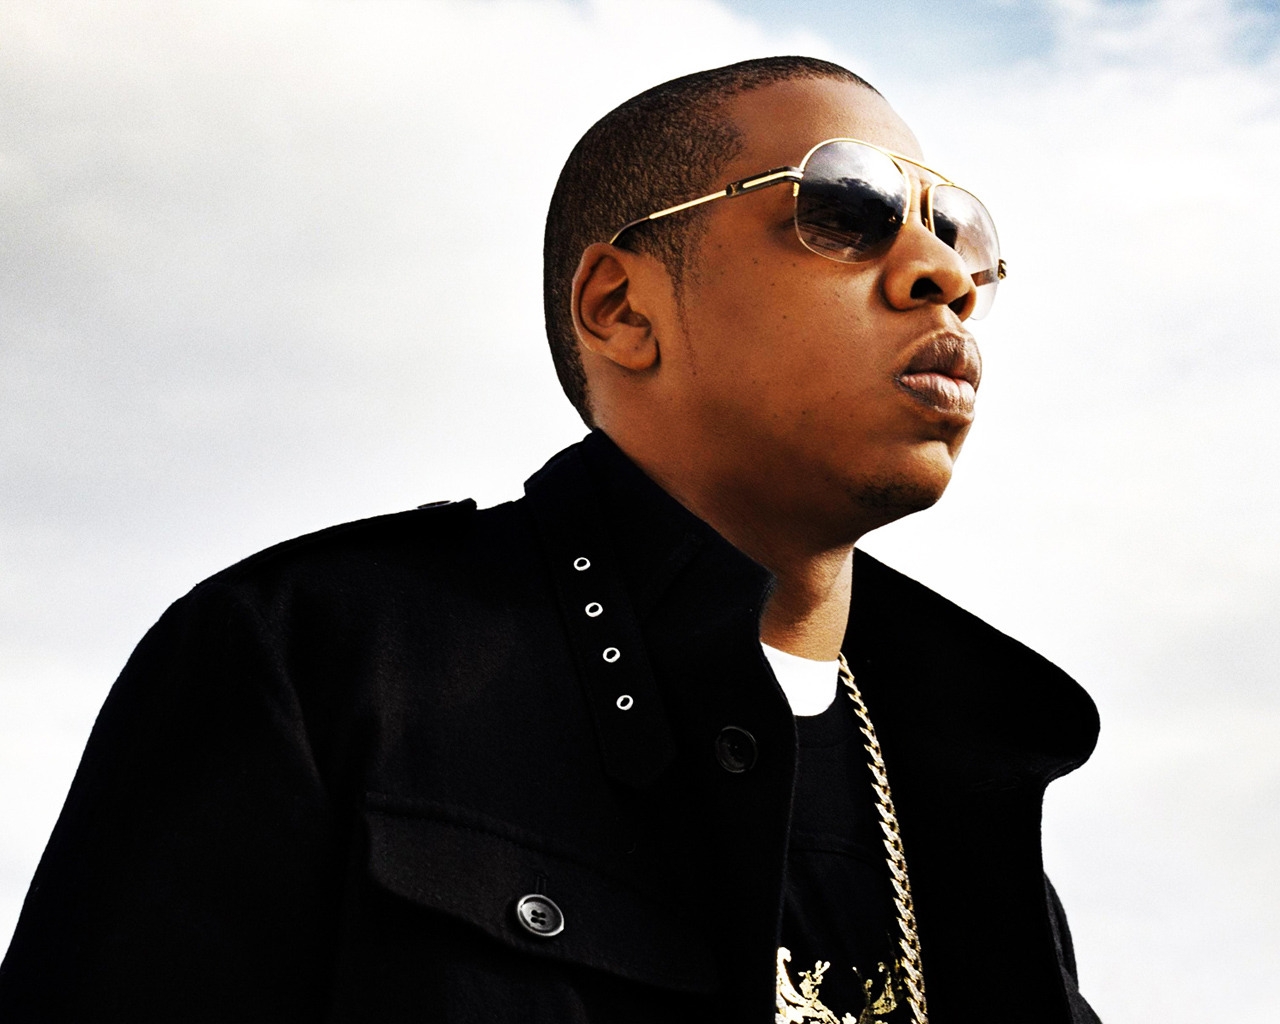 Jay Z for 1280 x 1024 resolution